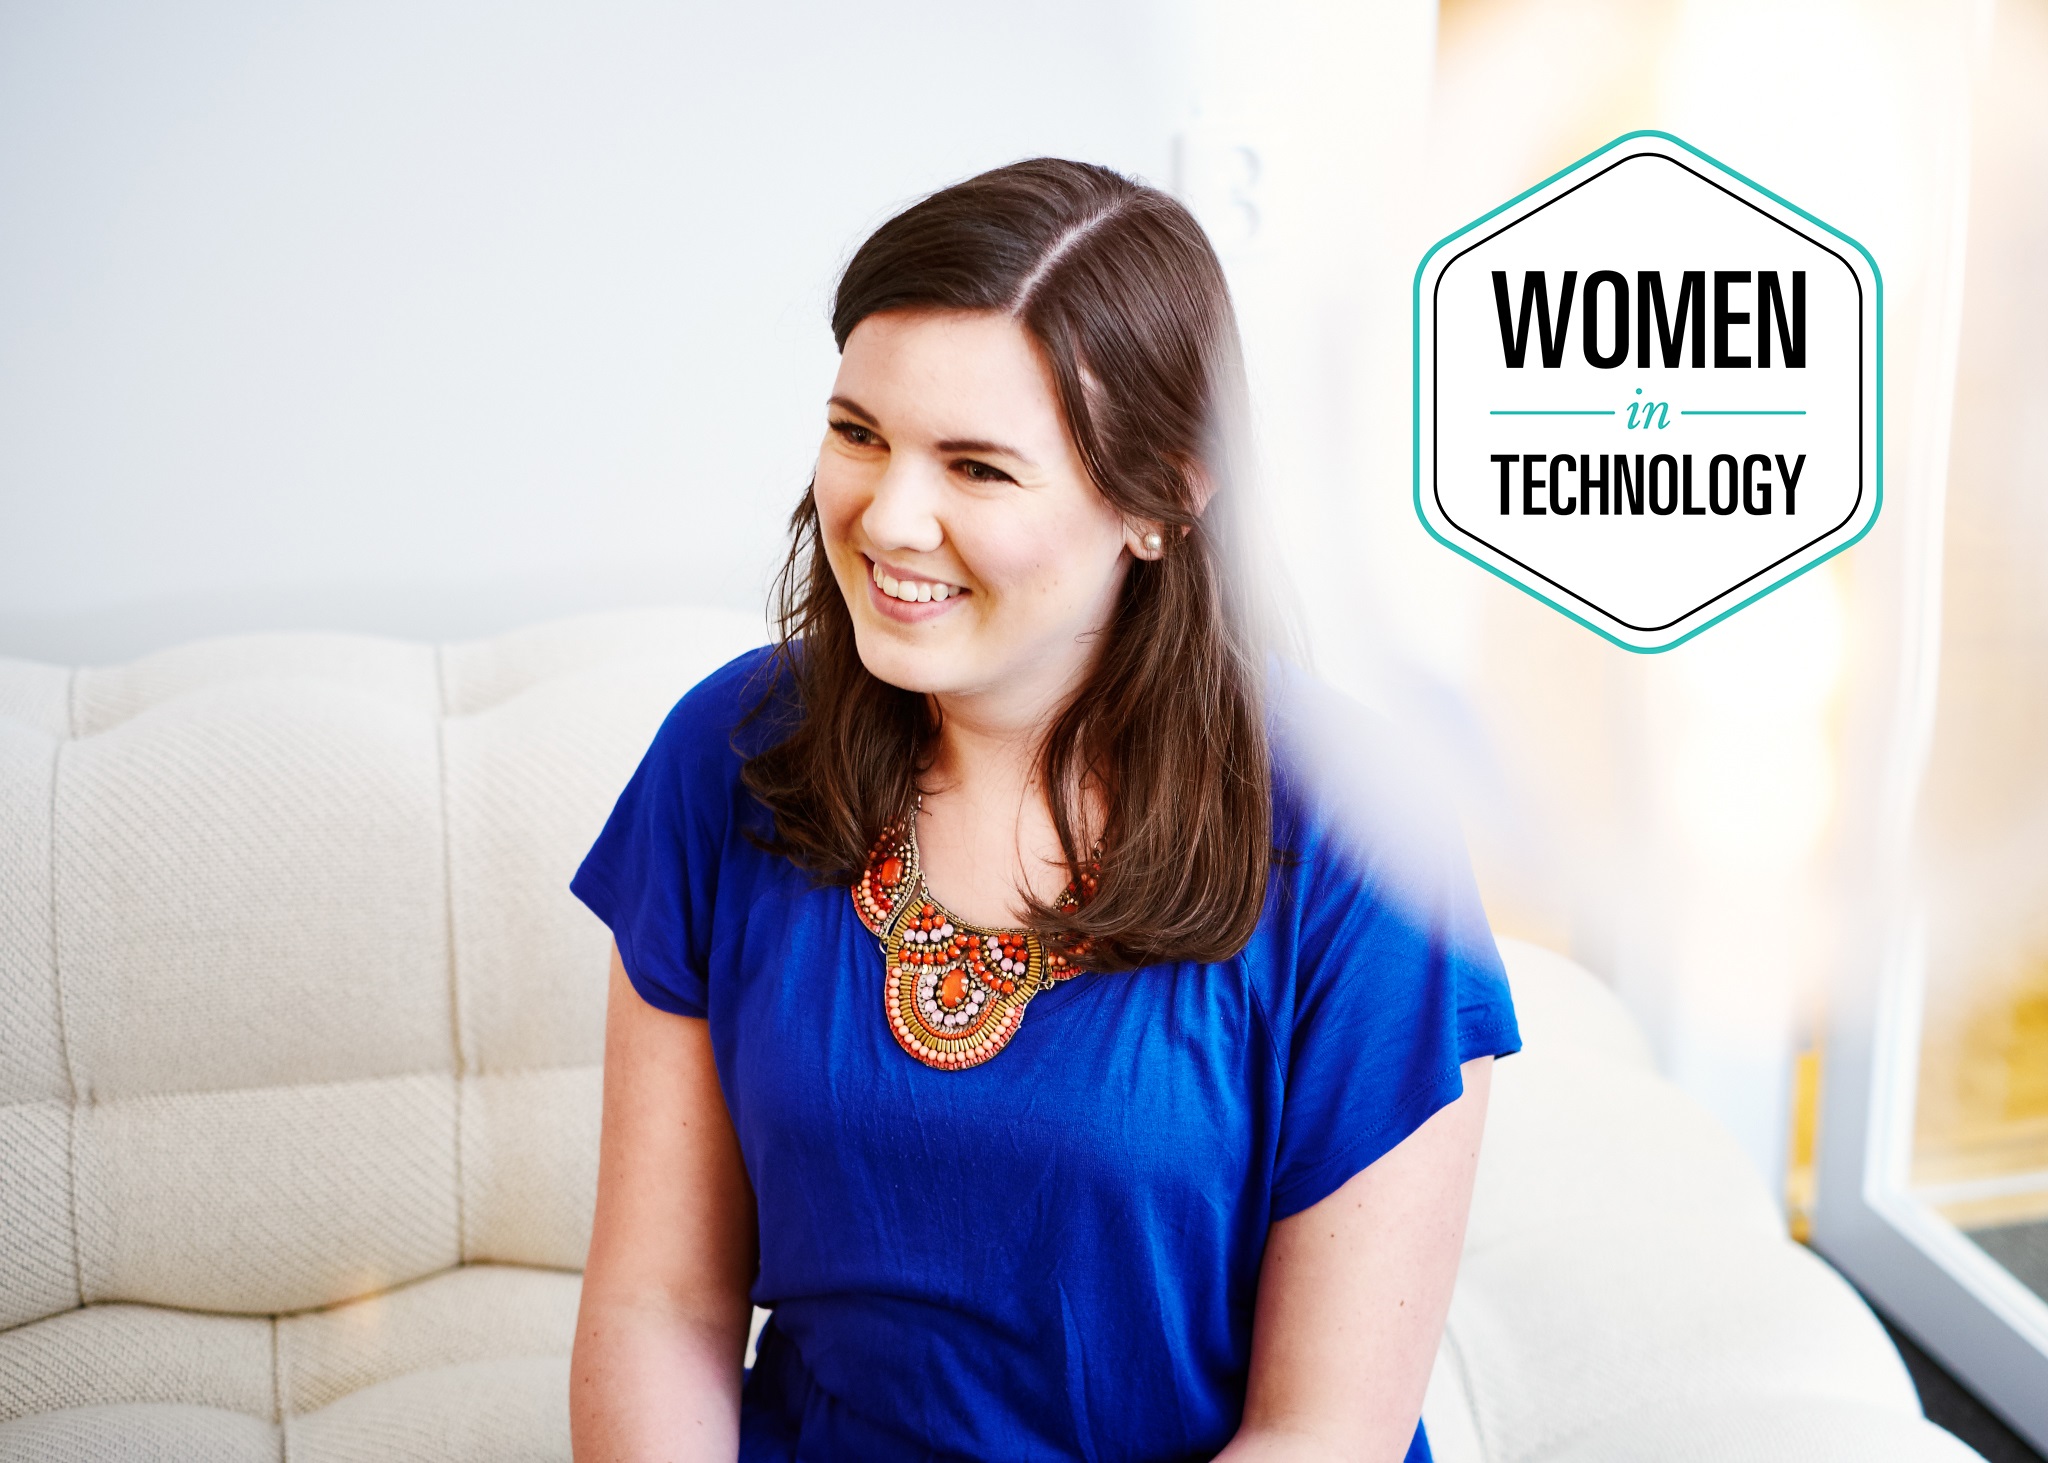 Women in Technology - Interview with Johanna